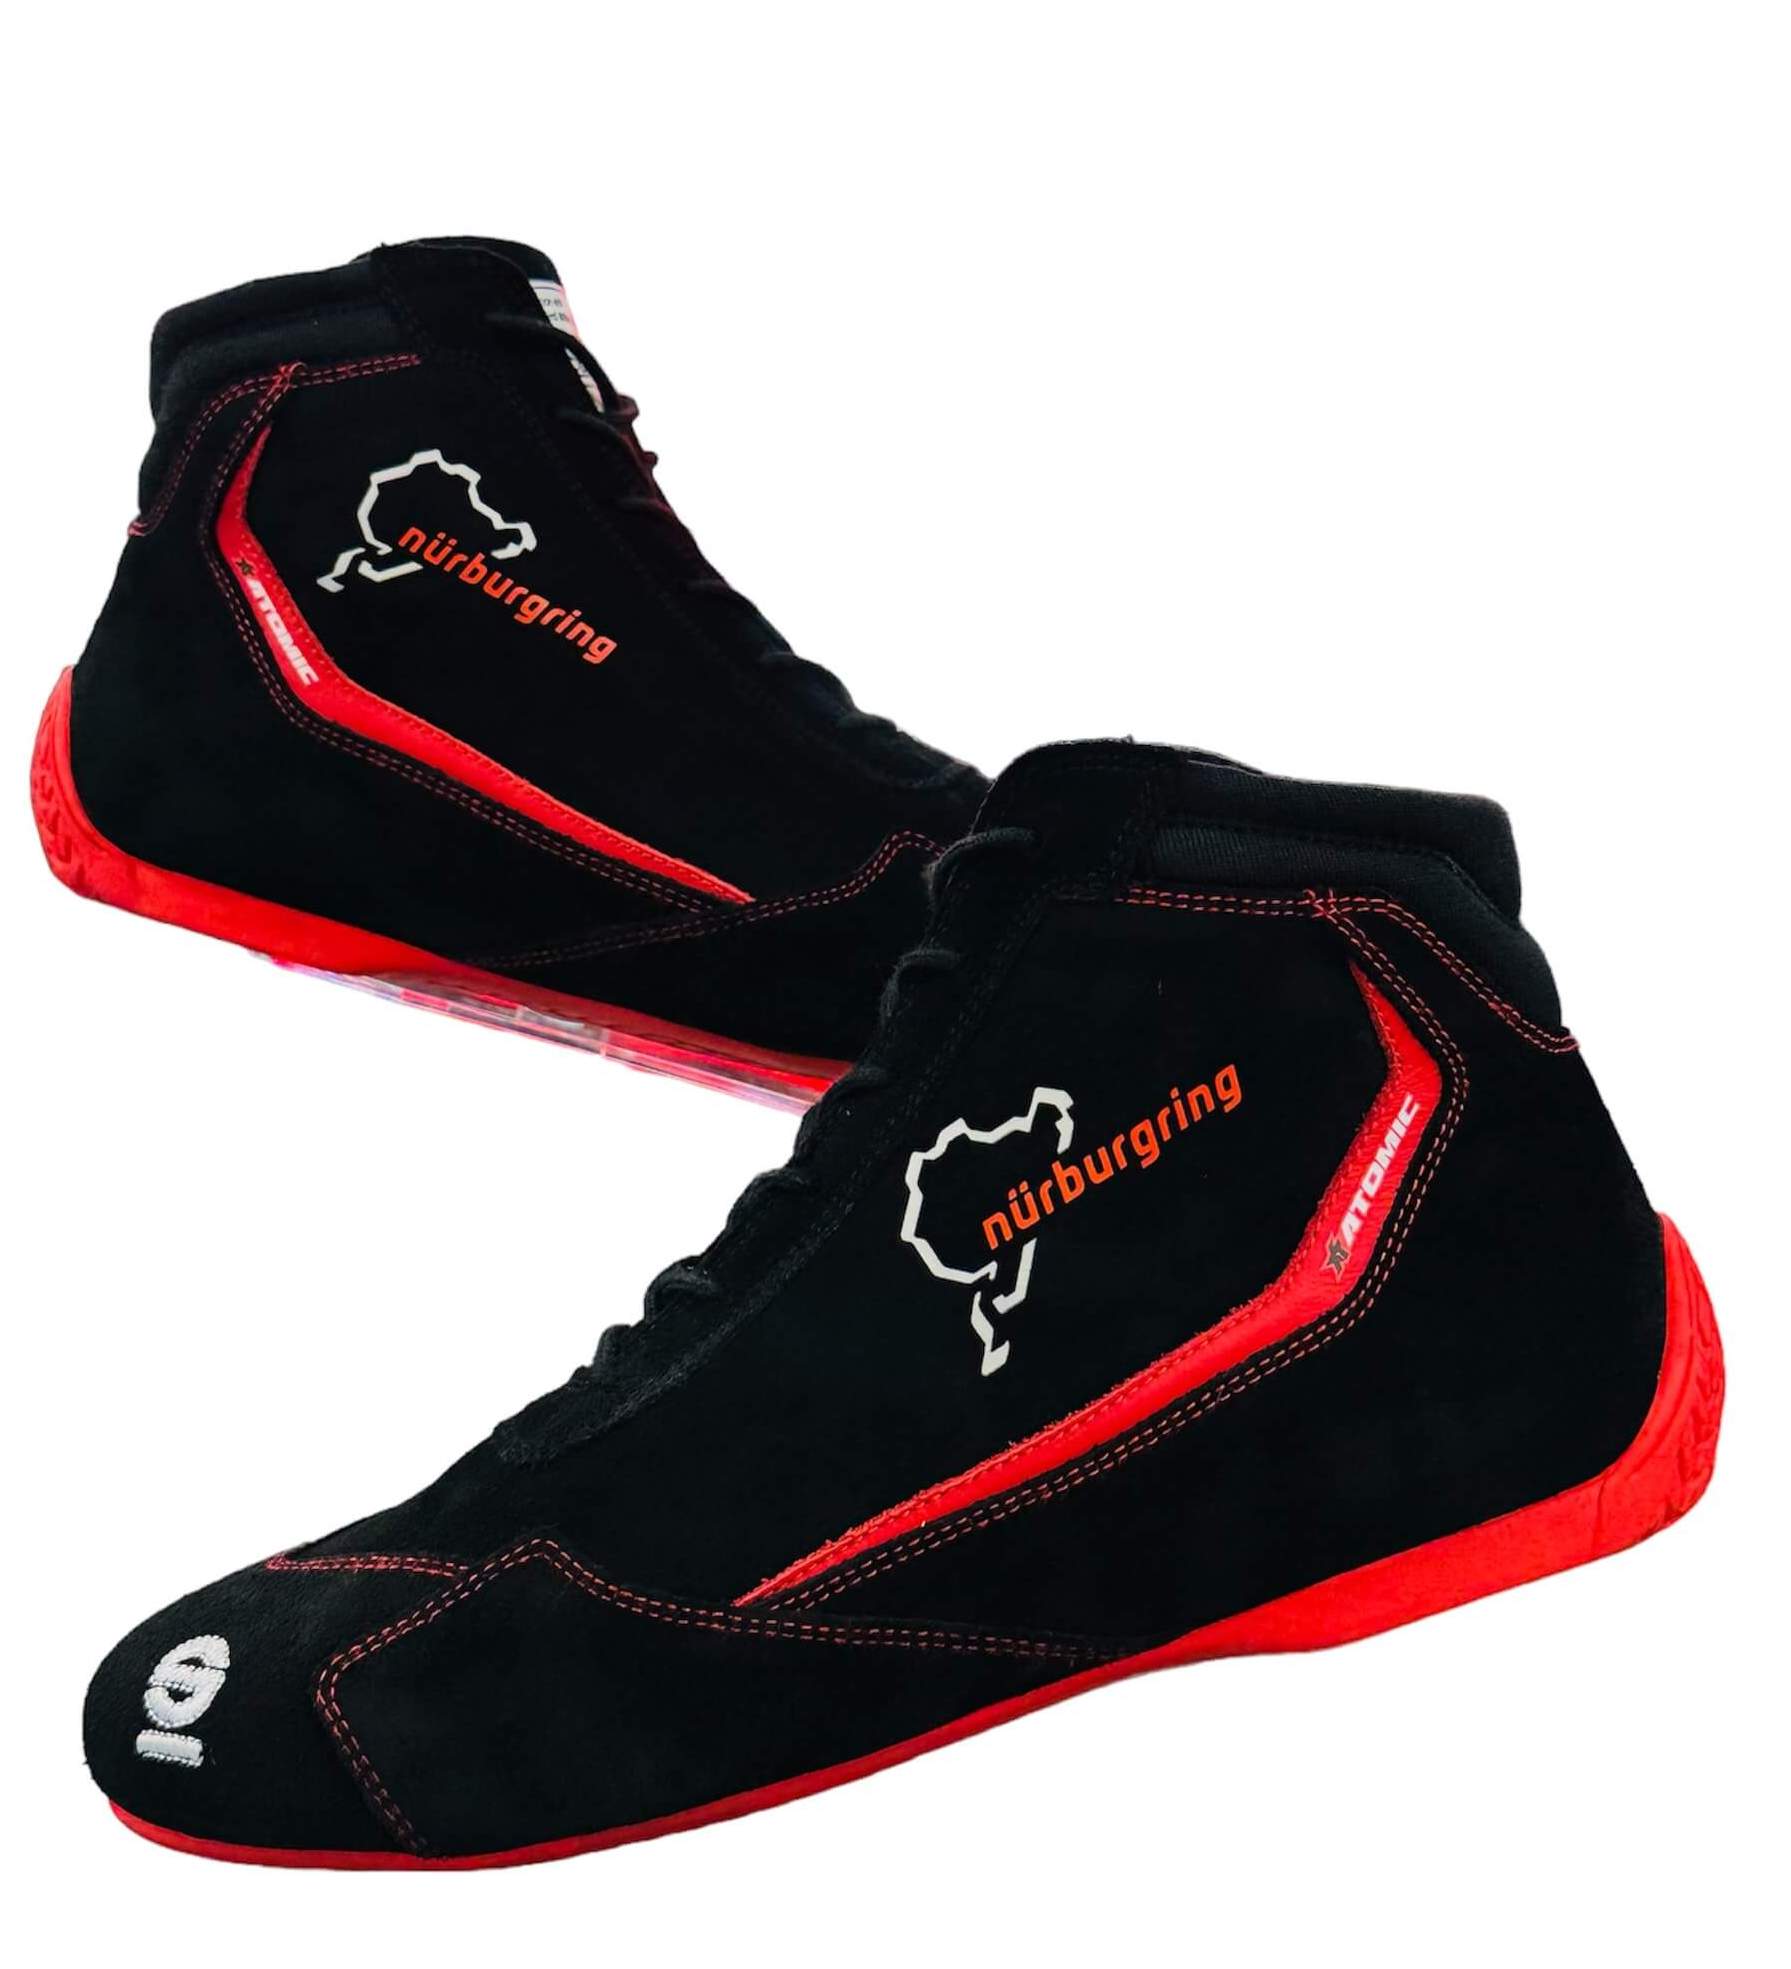 SPARCO 001295SP_NBR39 Shoes Slalom Nurburgring Edition black/red Size 39 Photo-3 